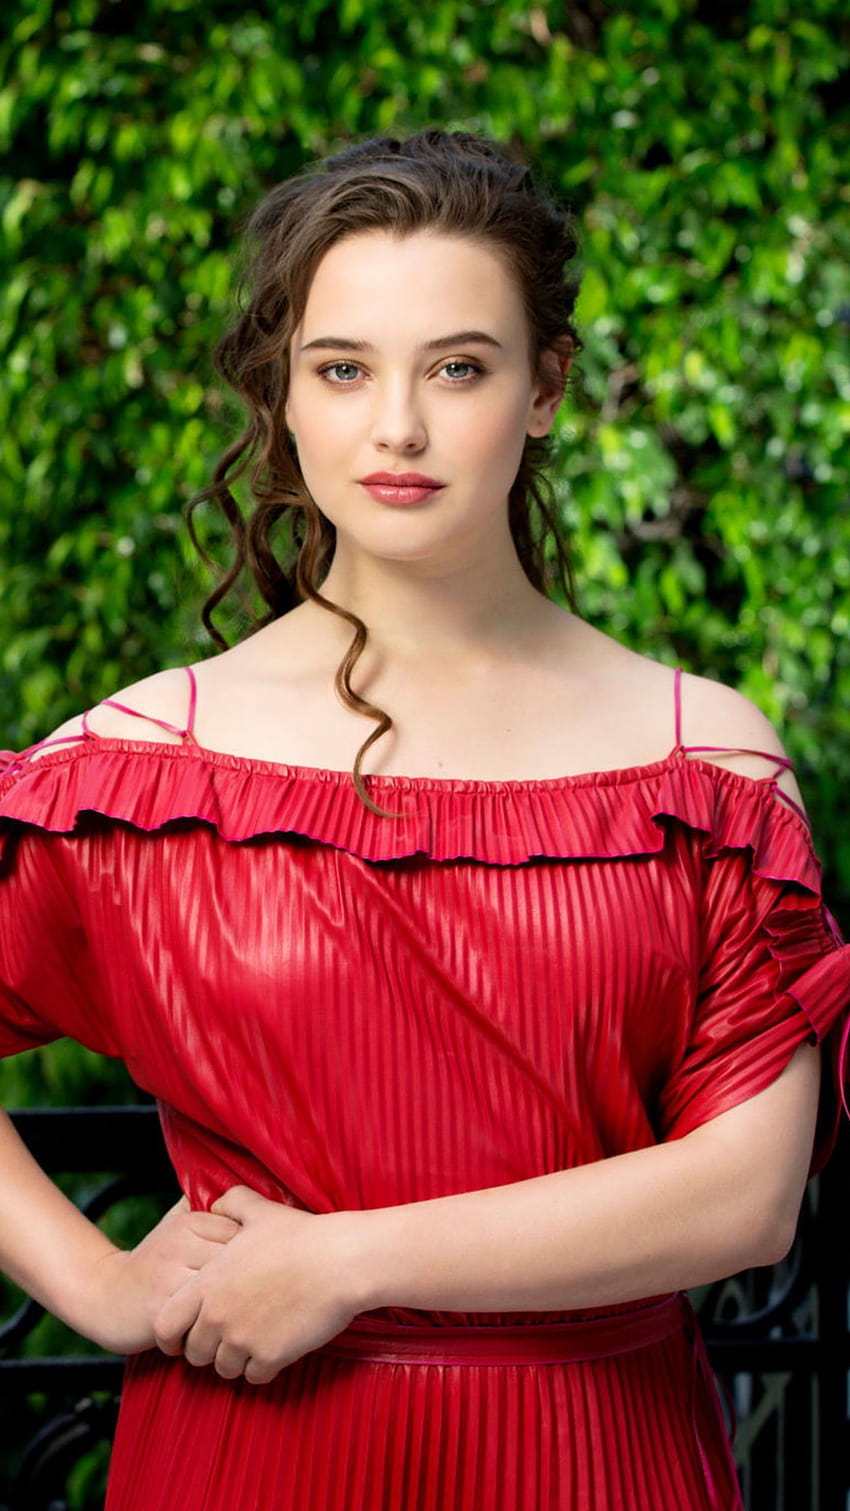 KATHERINE LANGFORD'S ROLE IN AVENGERS: ENDGAME AND WHY IT'S NOT FEATURED? HD phone wallpaper